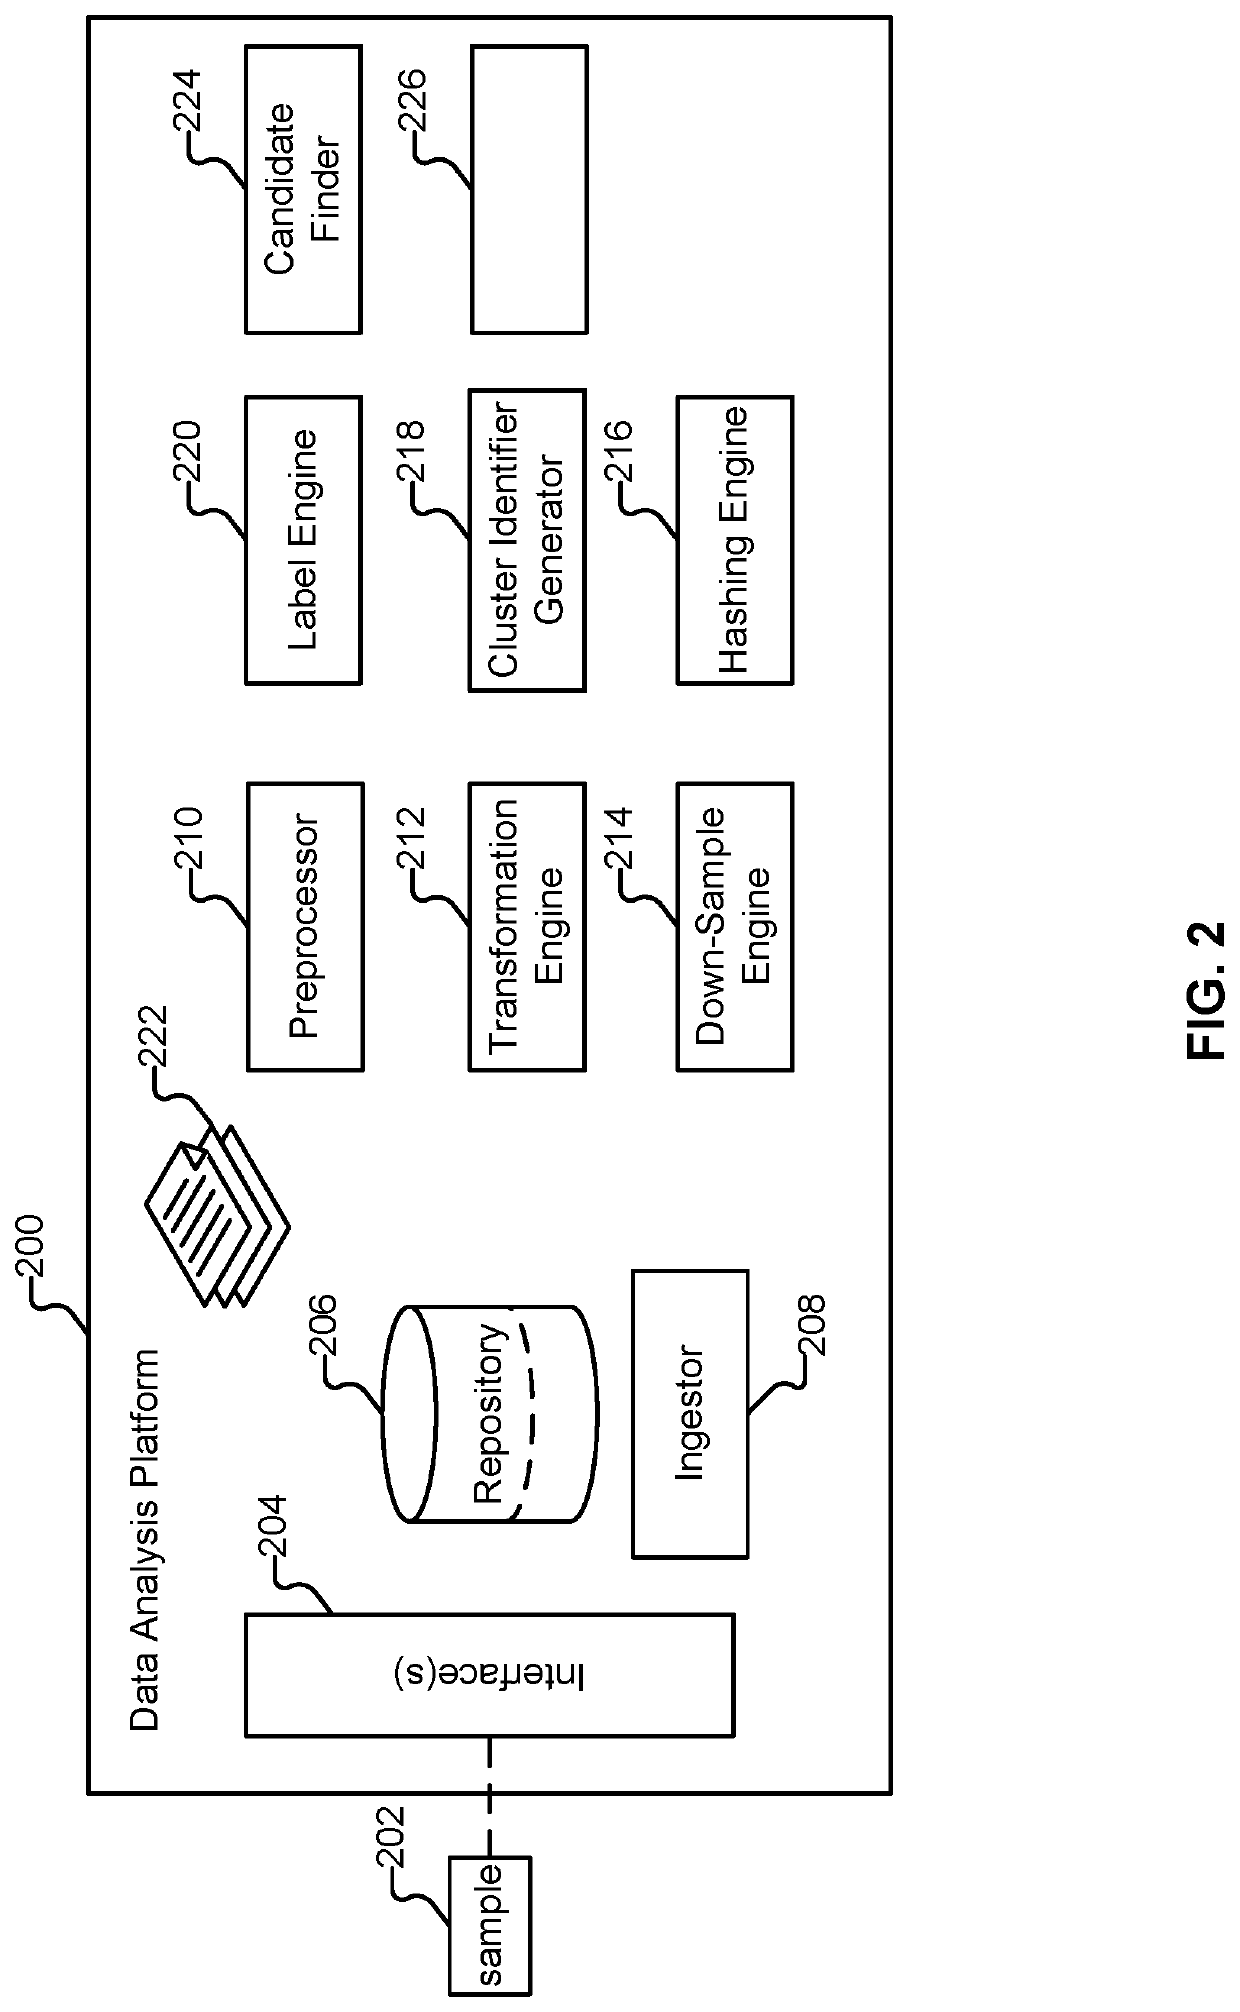 System and method for clustering files and assigning a maliciousness property based on clustering